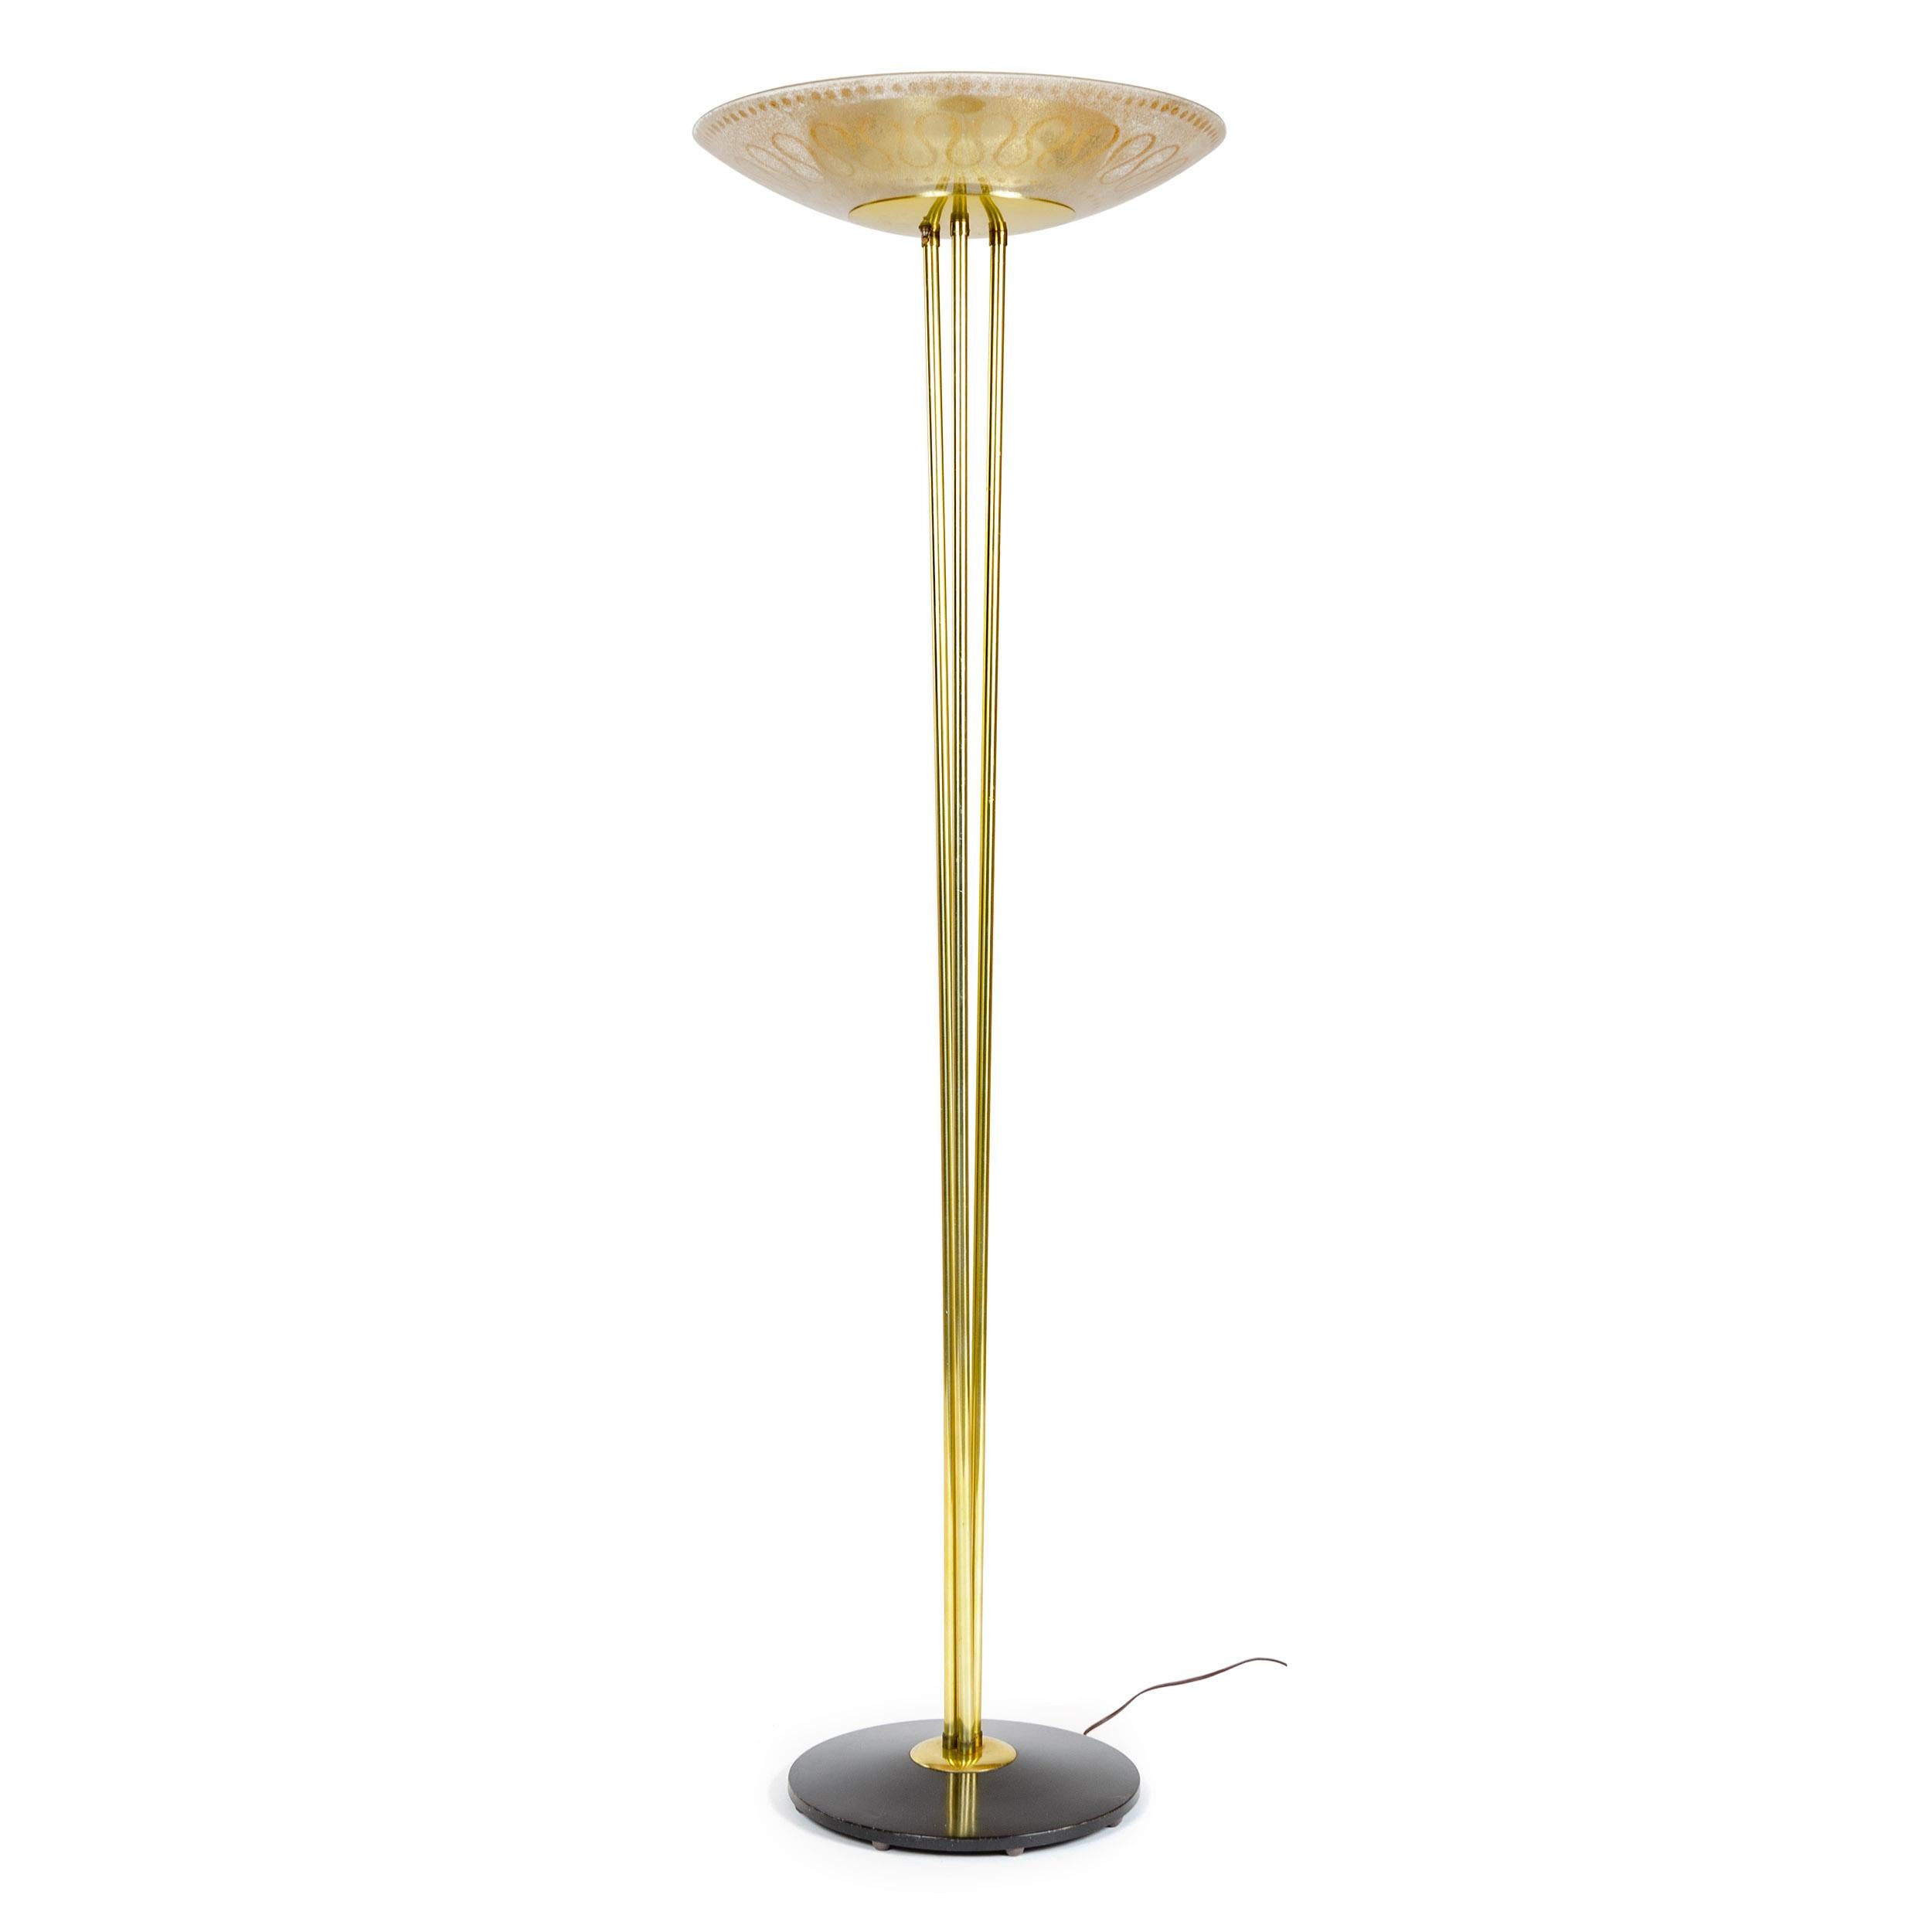 Classic uplight torchère floor lamp with three vertical brass rods supporting a shallow brass bowl and wider glass shade. The base designed by Gerald Thurston with a textured, fire annealed enameled glass shade designed by Carl Moser from his